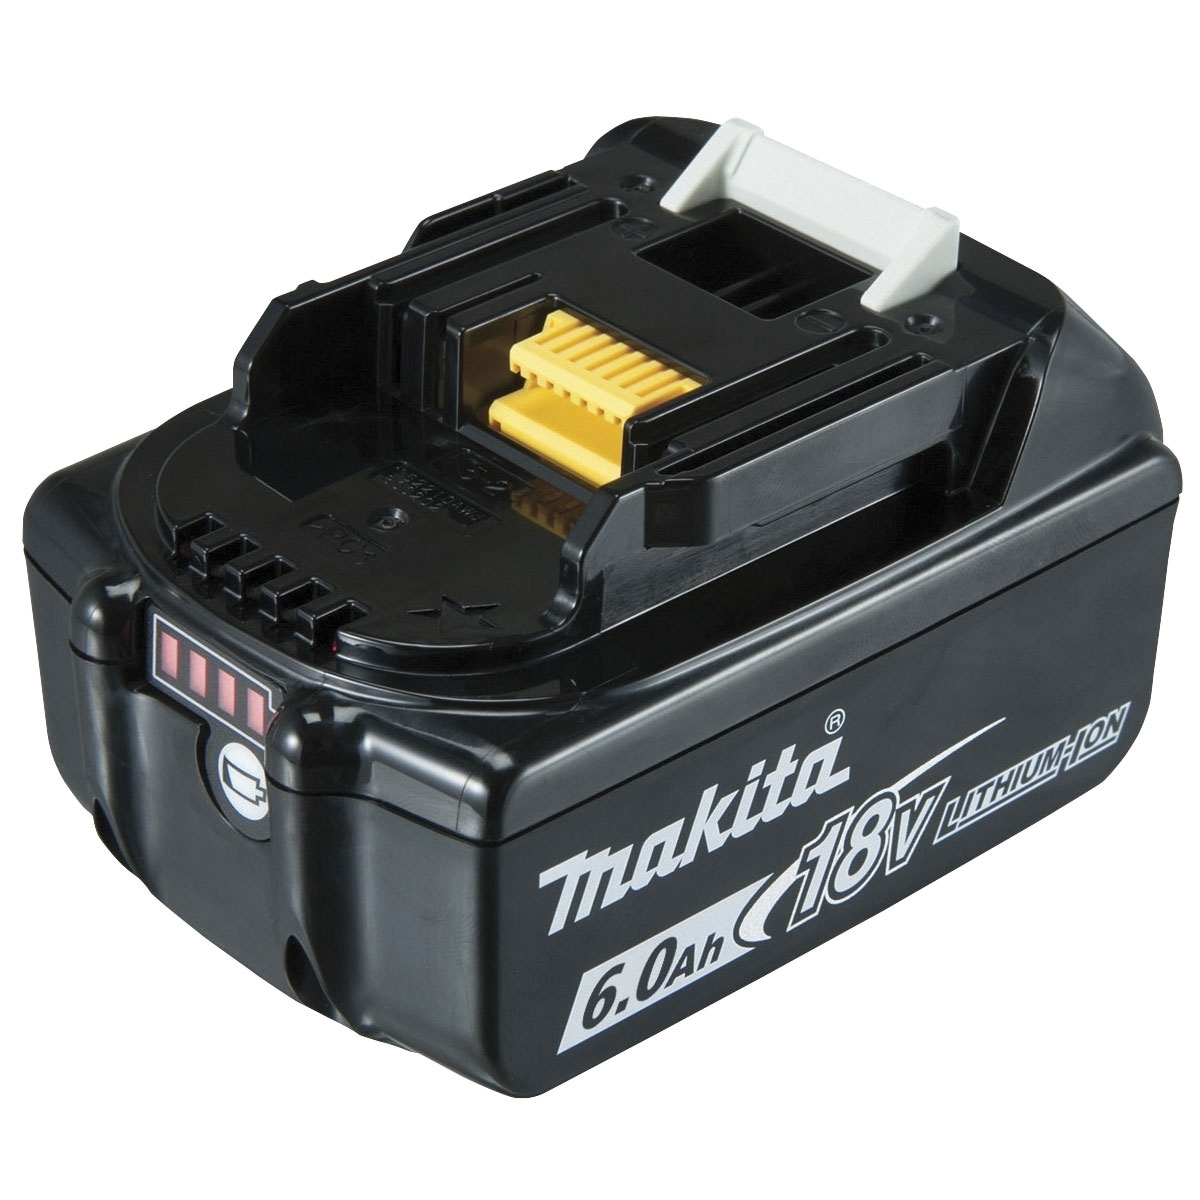 Makita 2x 18V 6.0Ah Lithium Battery with Charge Indicator BL1860B-L 198490-0